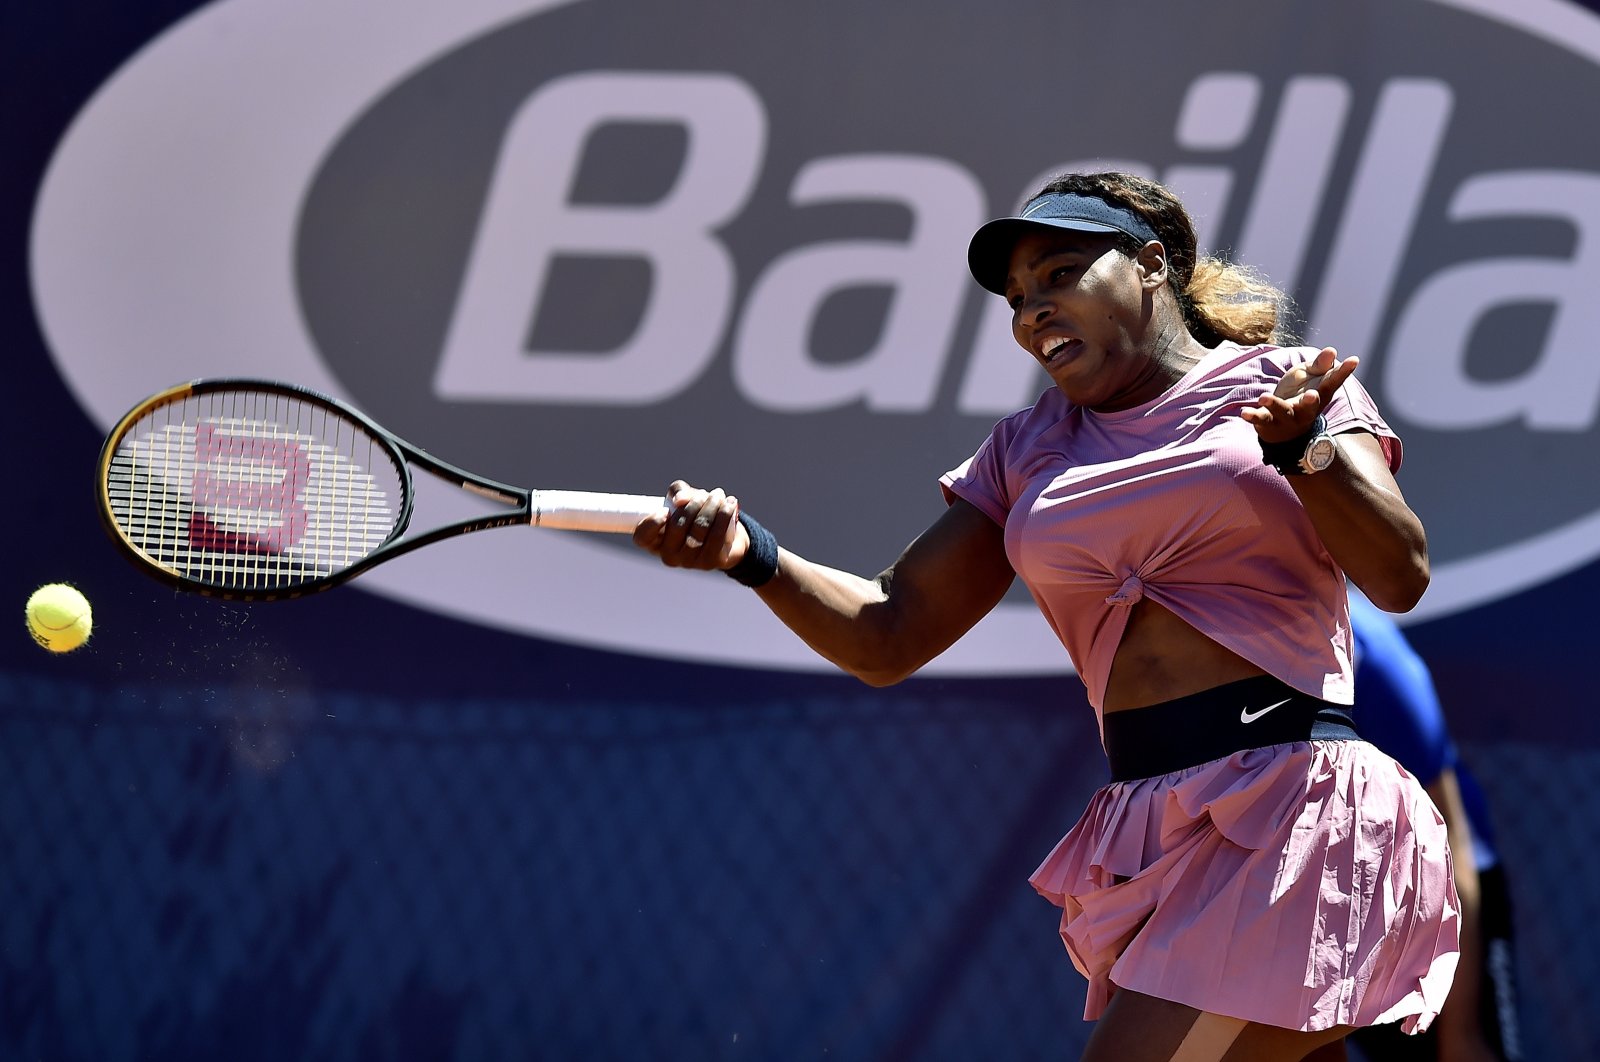 Serena Williams of the United States returns the ball to Italy's Lisa Pigato during their match at the Emilia Romagna Open tennis tournament, in Parma, Italy, May 17, 2021. (AP Photo)